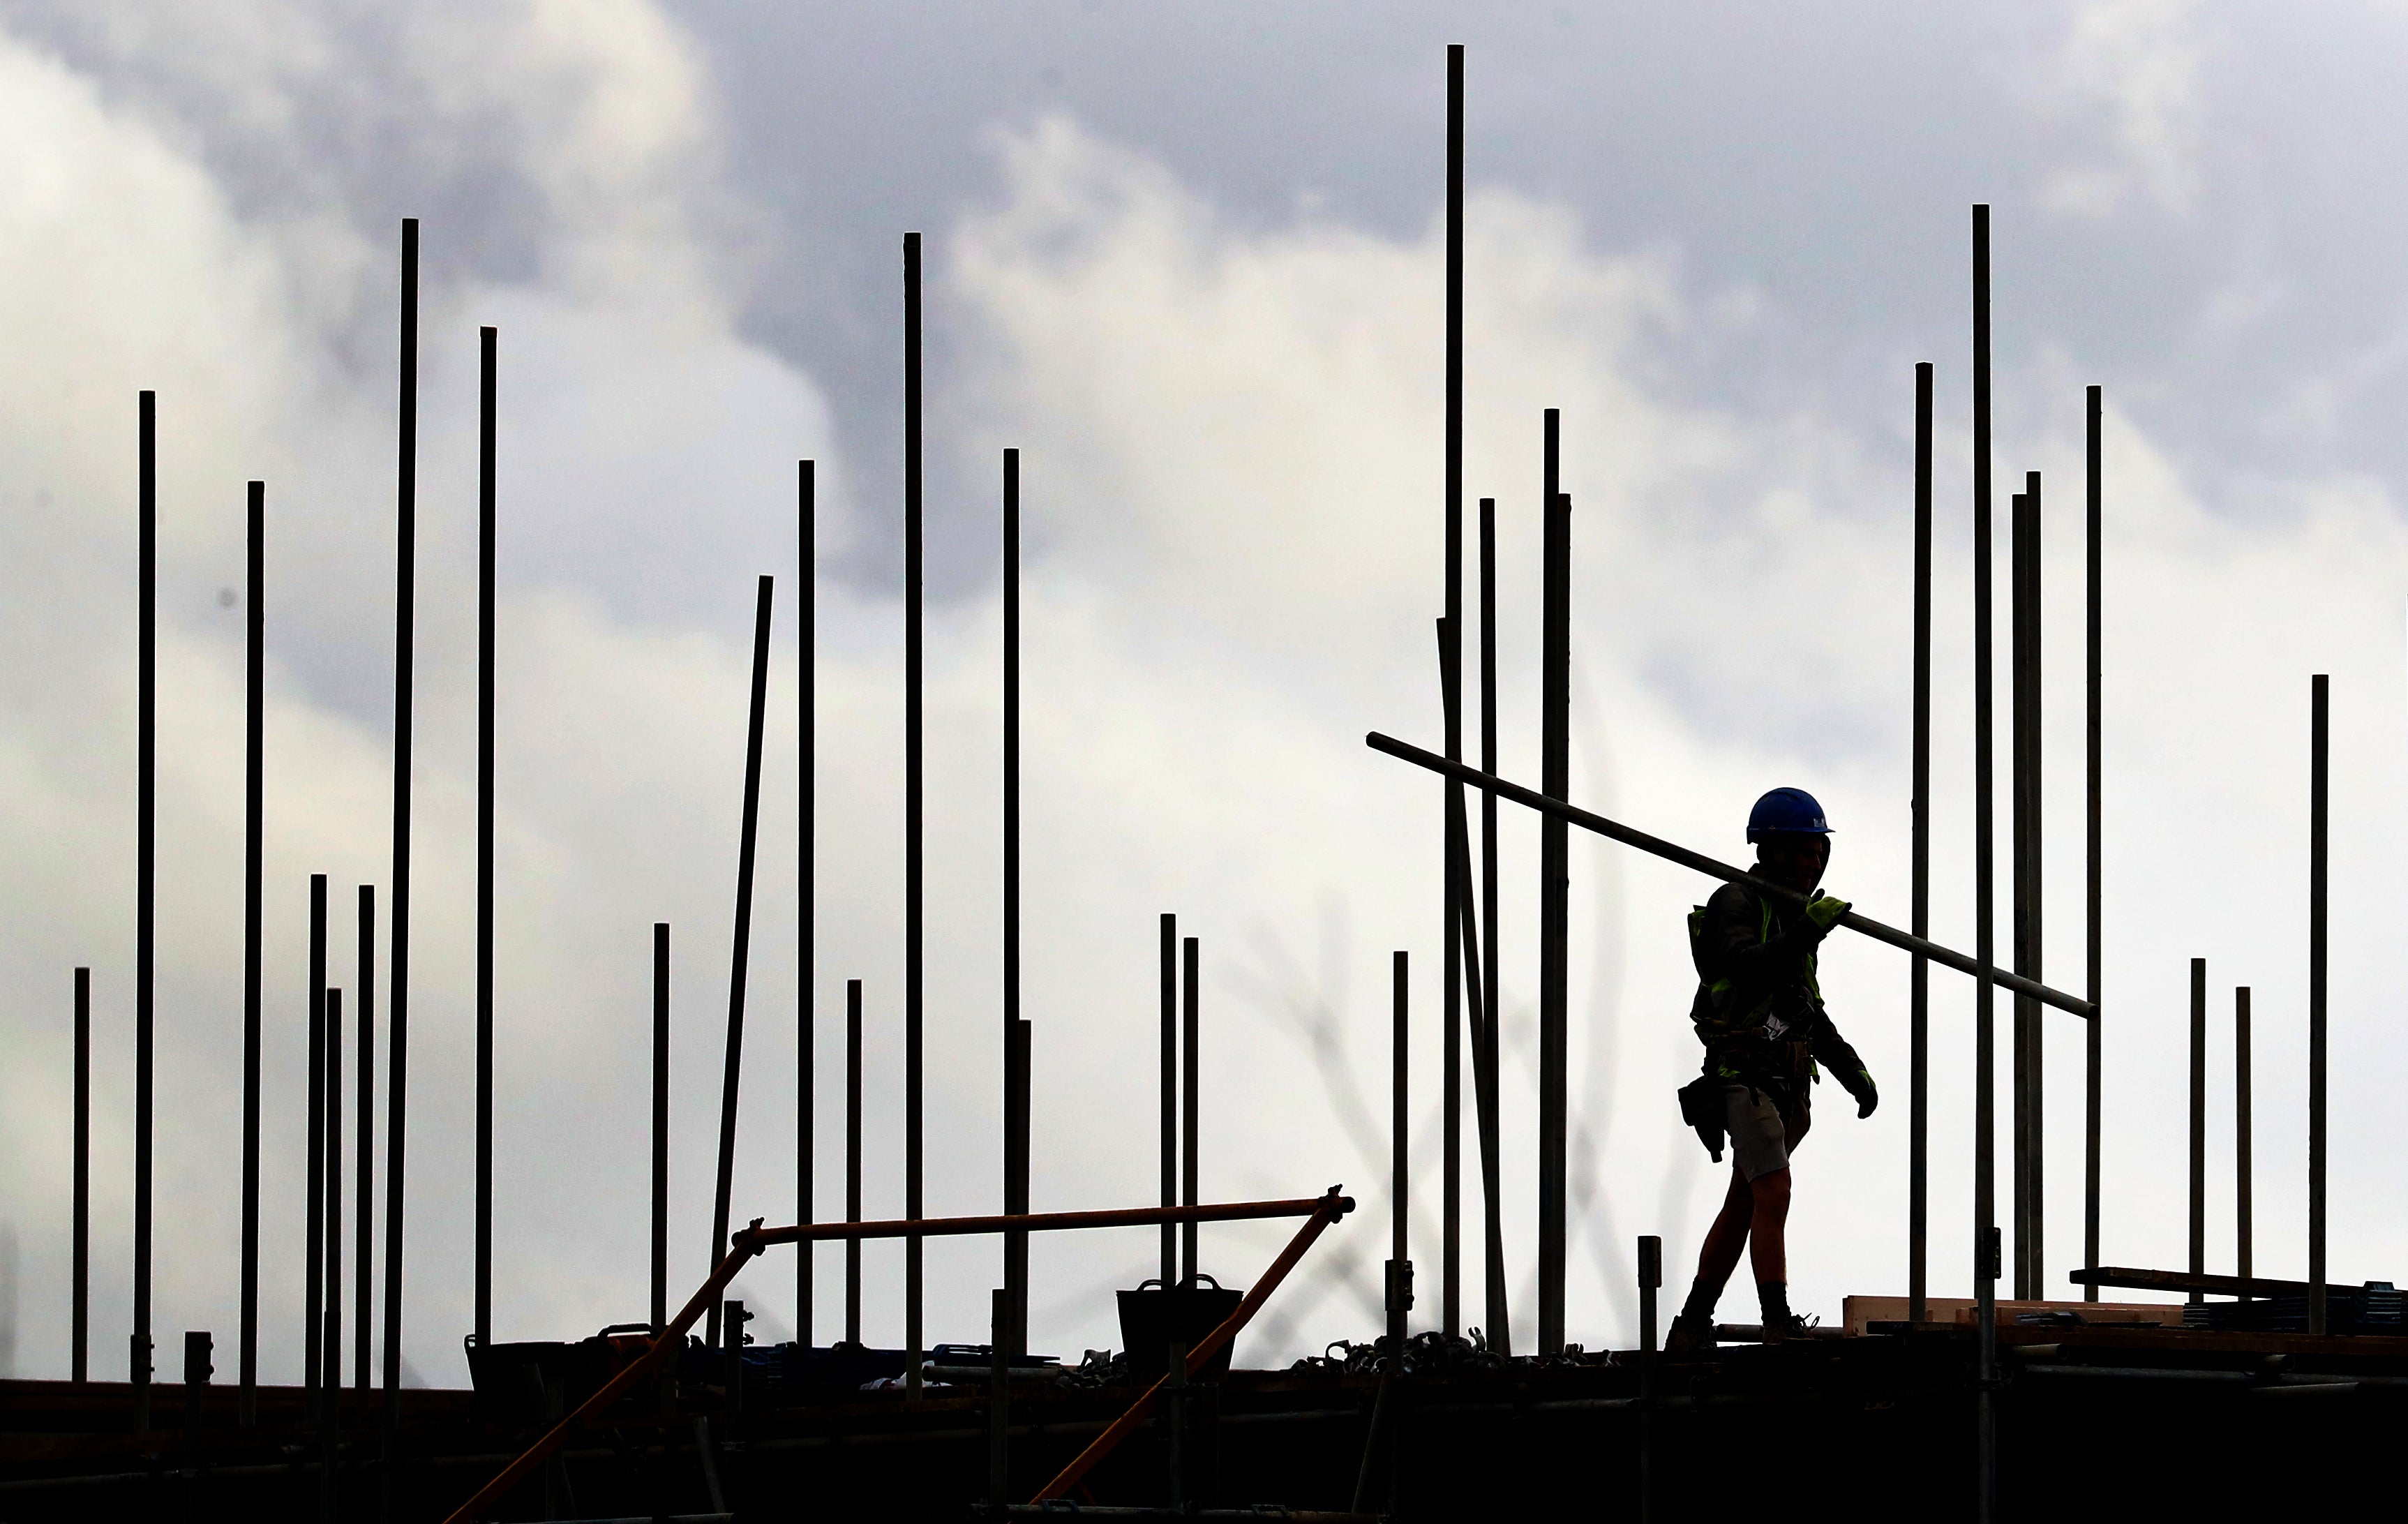 Construction, building and transport workers are among those least likely to have received a booster or third dose of Covid-19 vaccine, figures suggest (Gareth Fuller/PA)